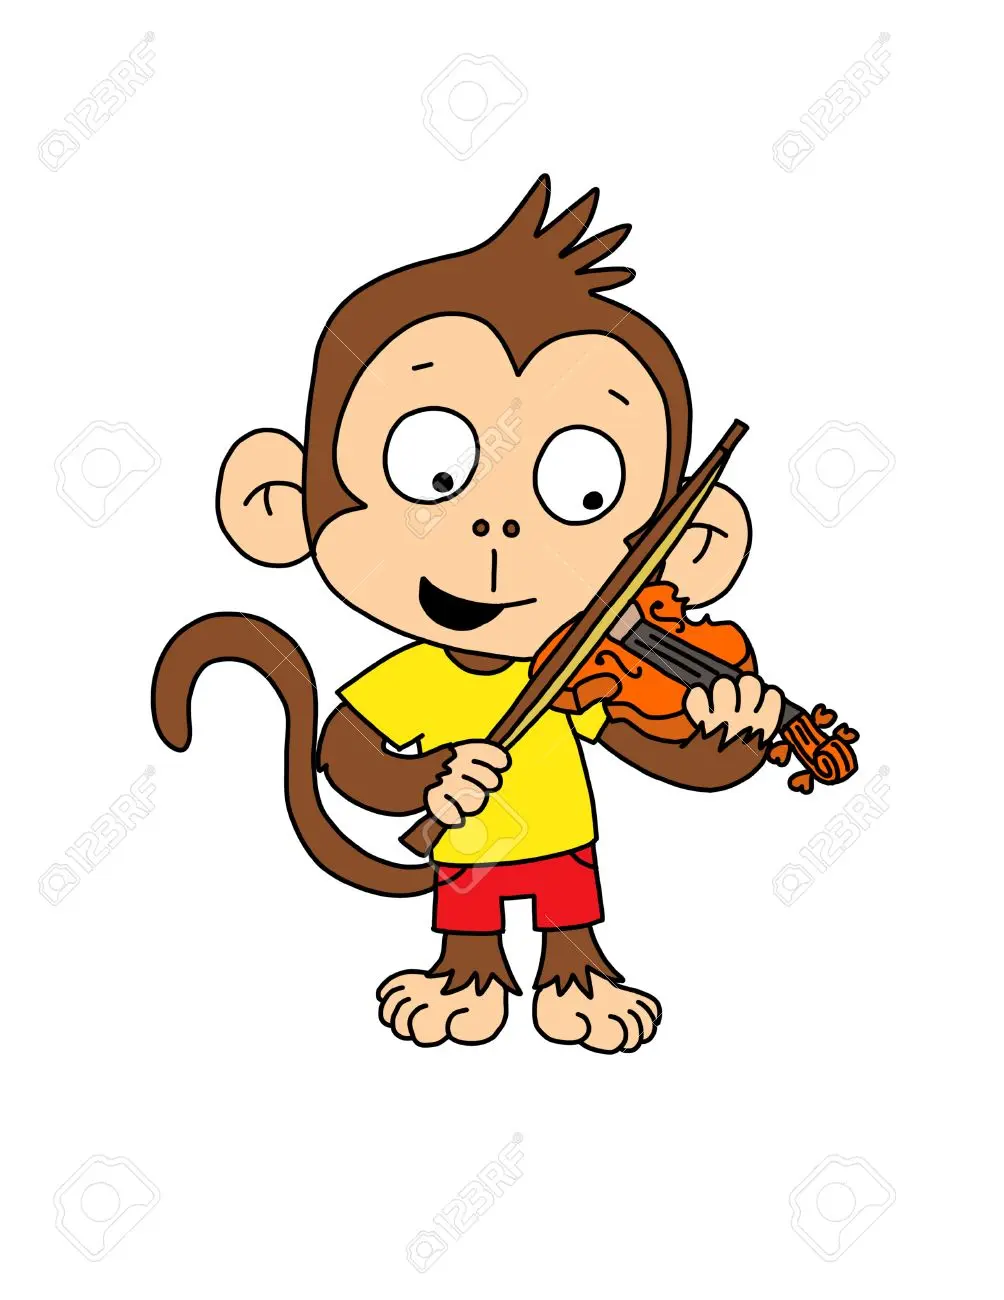 monkey violin - Who sings the dance monkey song